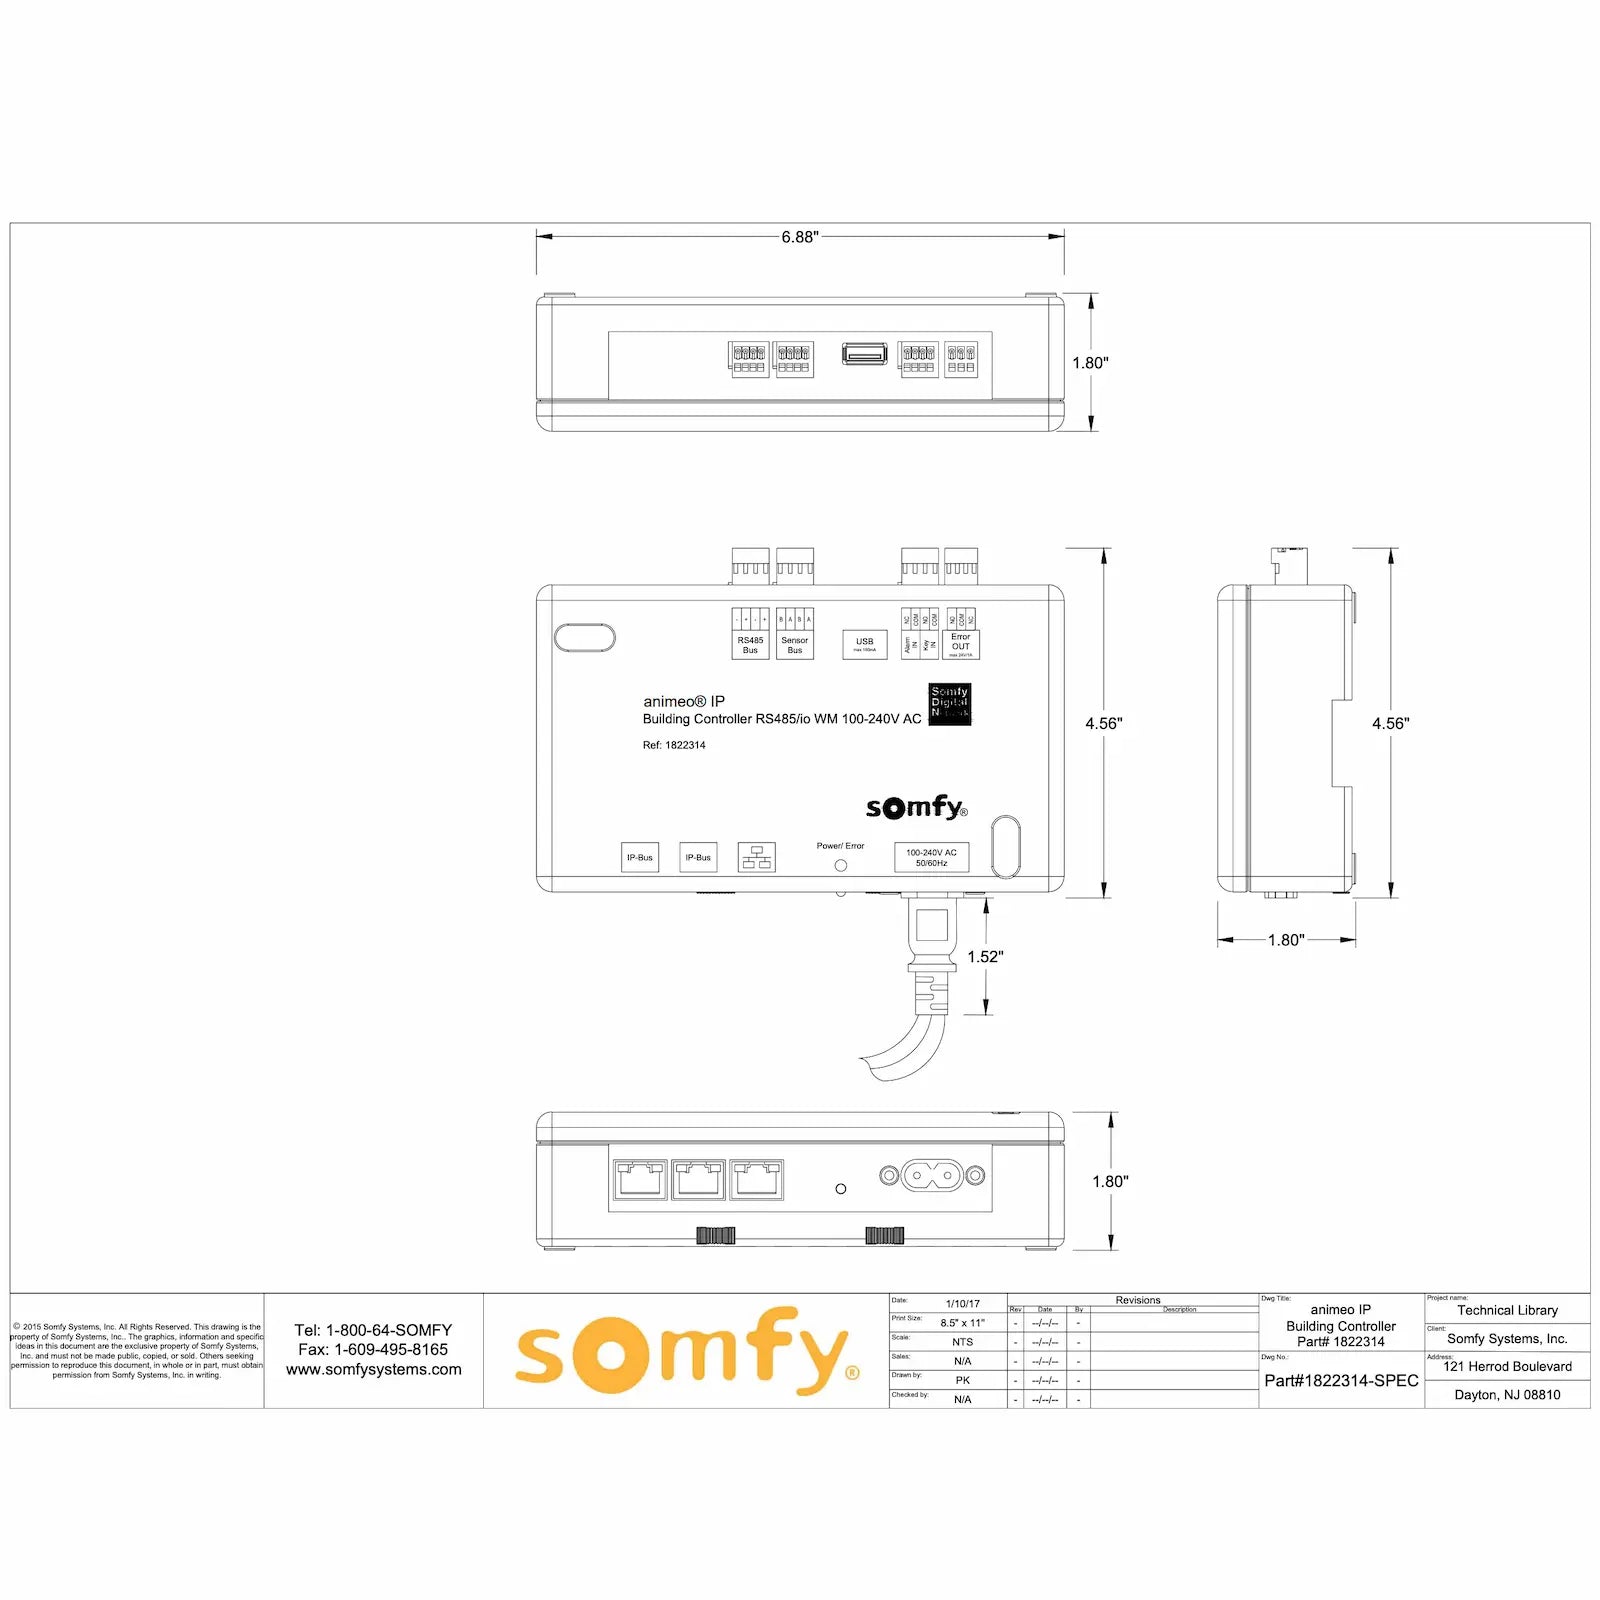 Somfy Animeo® IP Building Controller 1822314